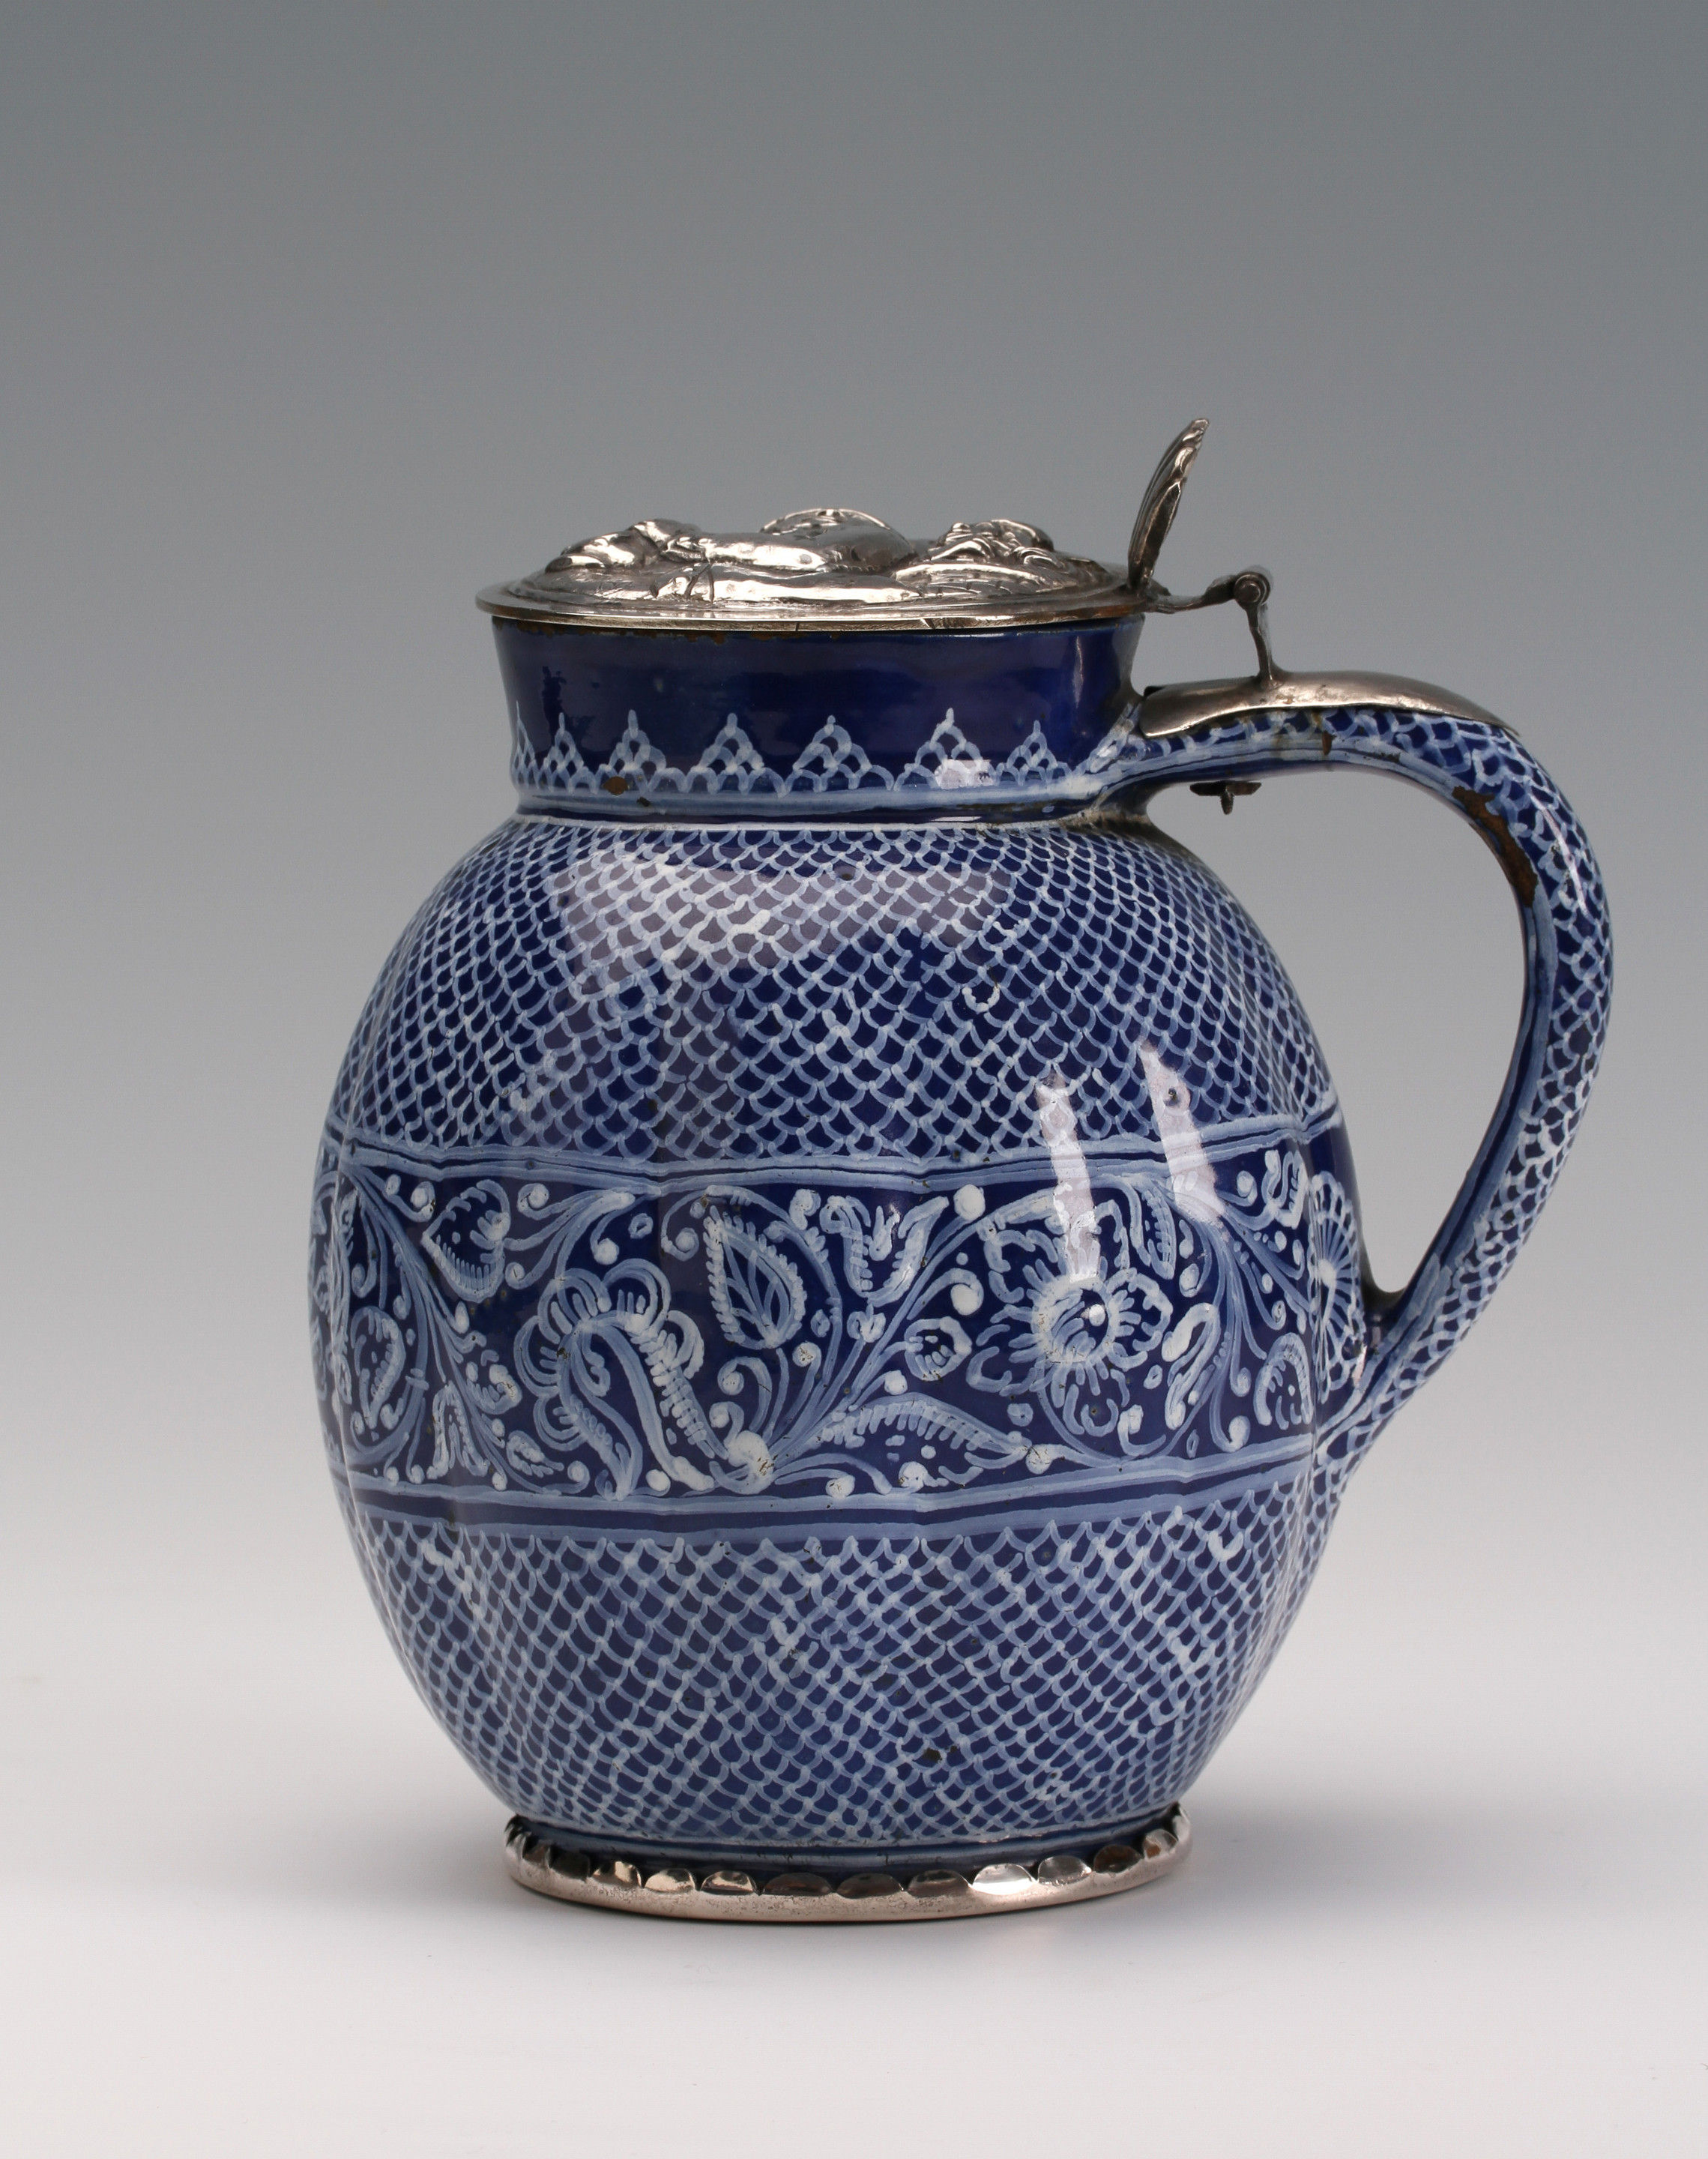 A silver-mounted Anabaptist or Hutterite faience jug